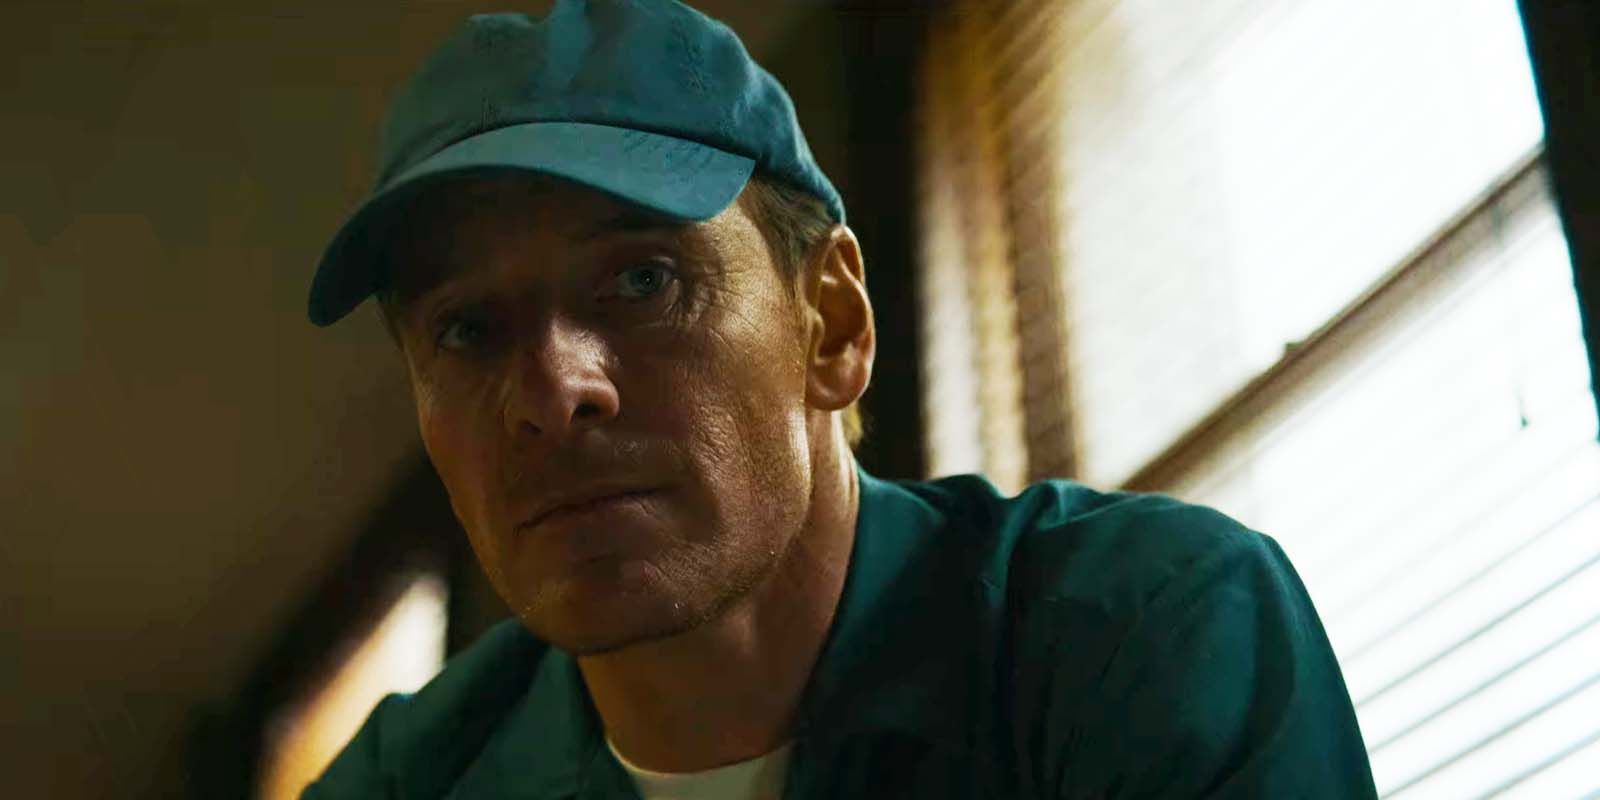 Michael Fassbender in disguise as a recycling collector in The Killer